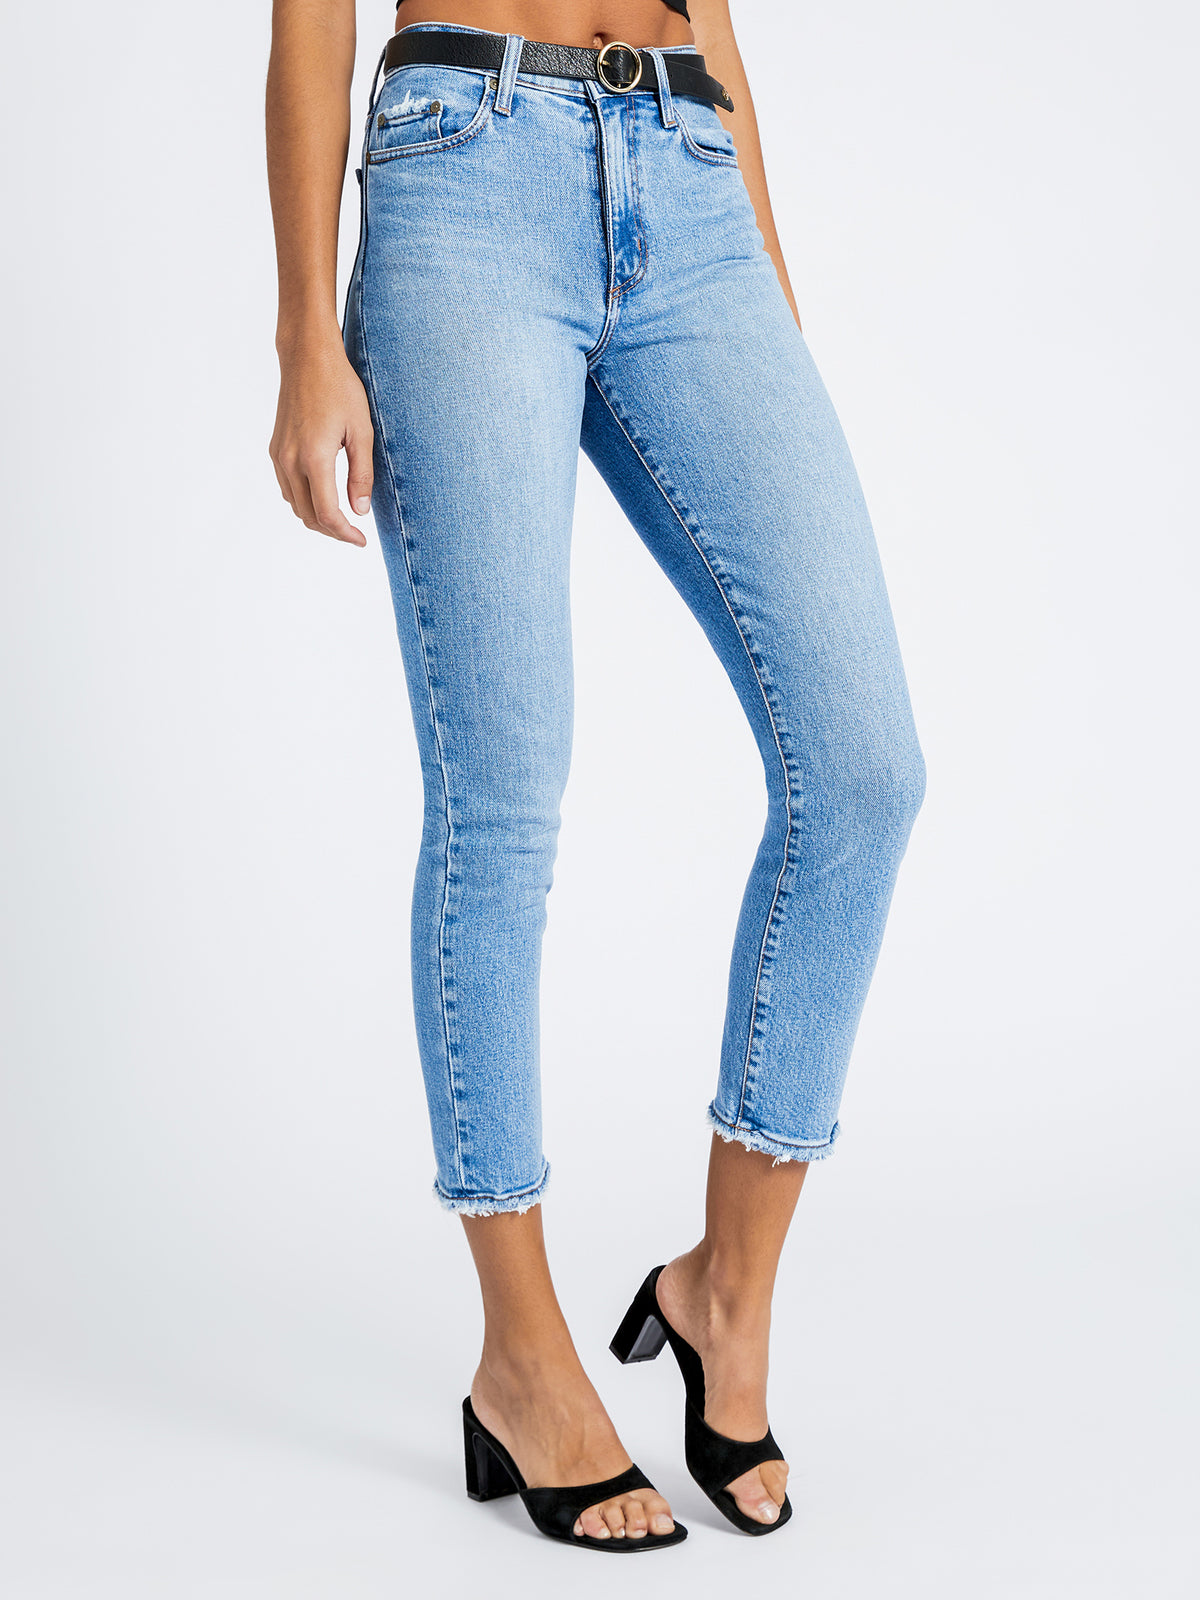 Kennedy High-Rise Slim Cropped Jeans in Moden Blue Denim